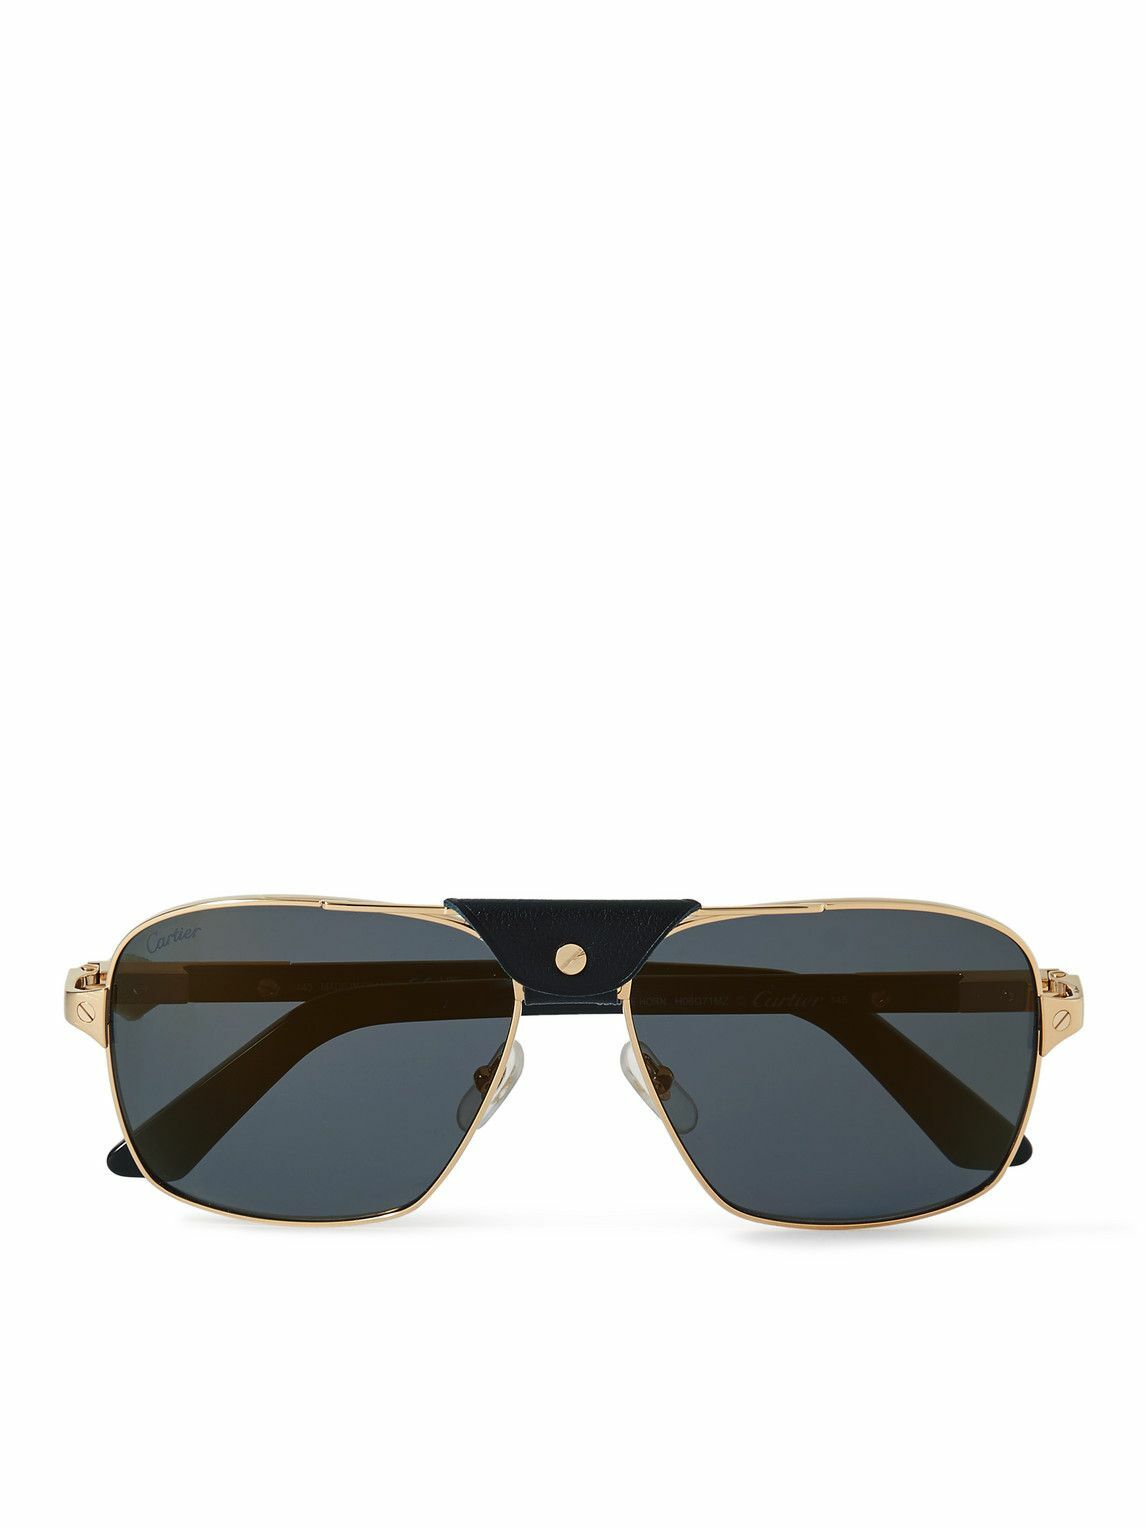 Cartier Eyewear - Aviator-Style Leather-Trimmed Gold-Tone and Acetate ...